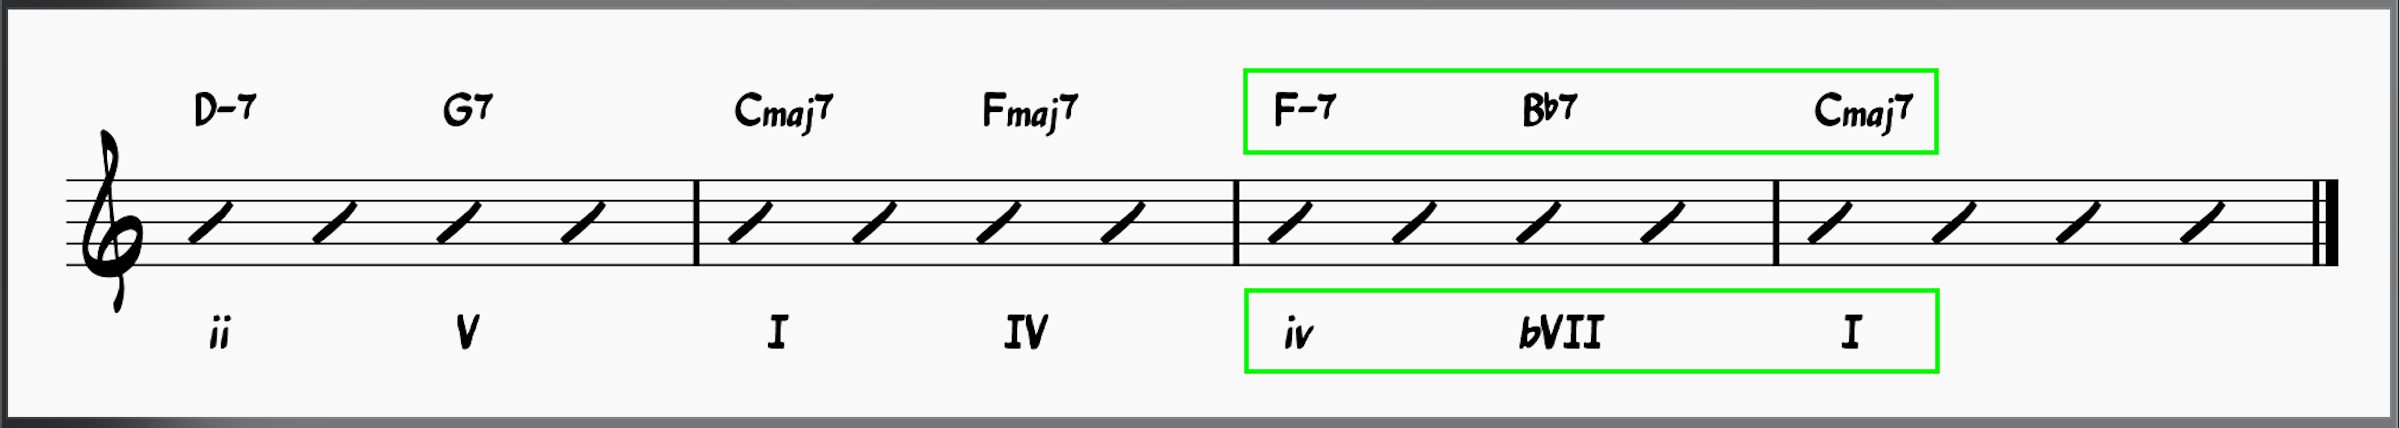 backdoor progression using borrowed chords in the key of C